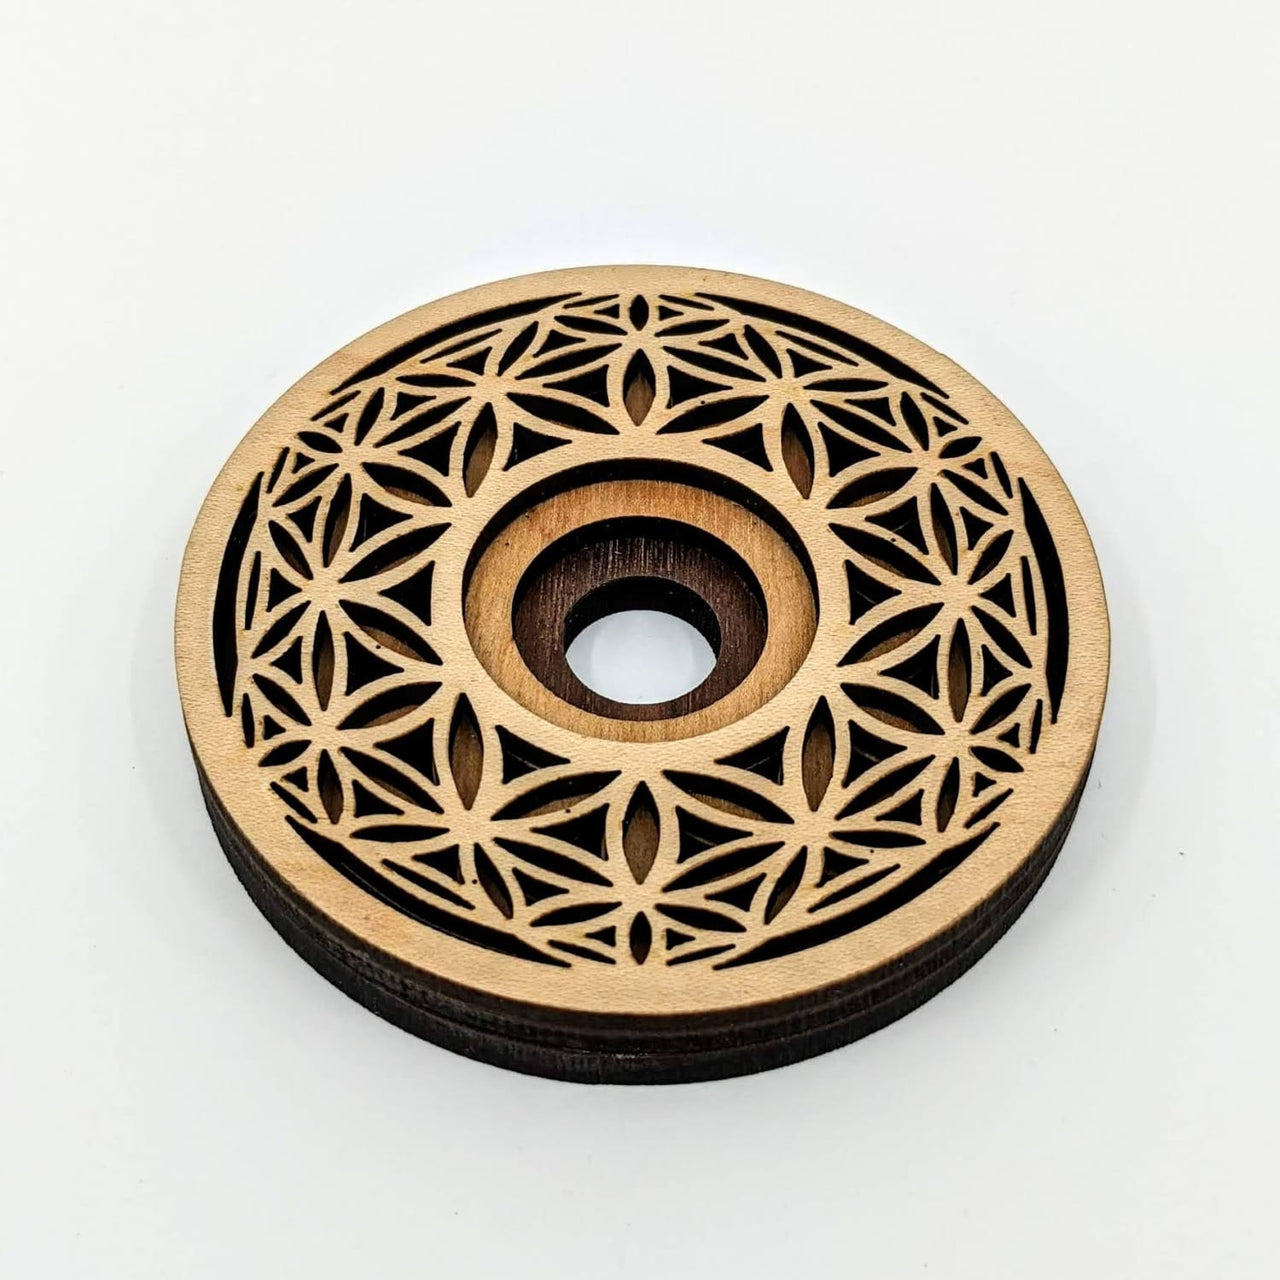 Laser Cut Sphere Stand Flower of Life (34g) #SK7604 - $24